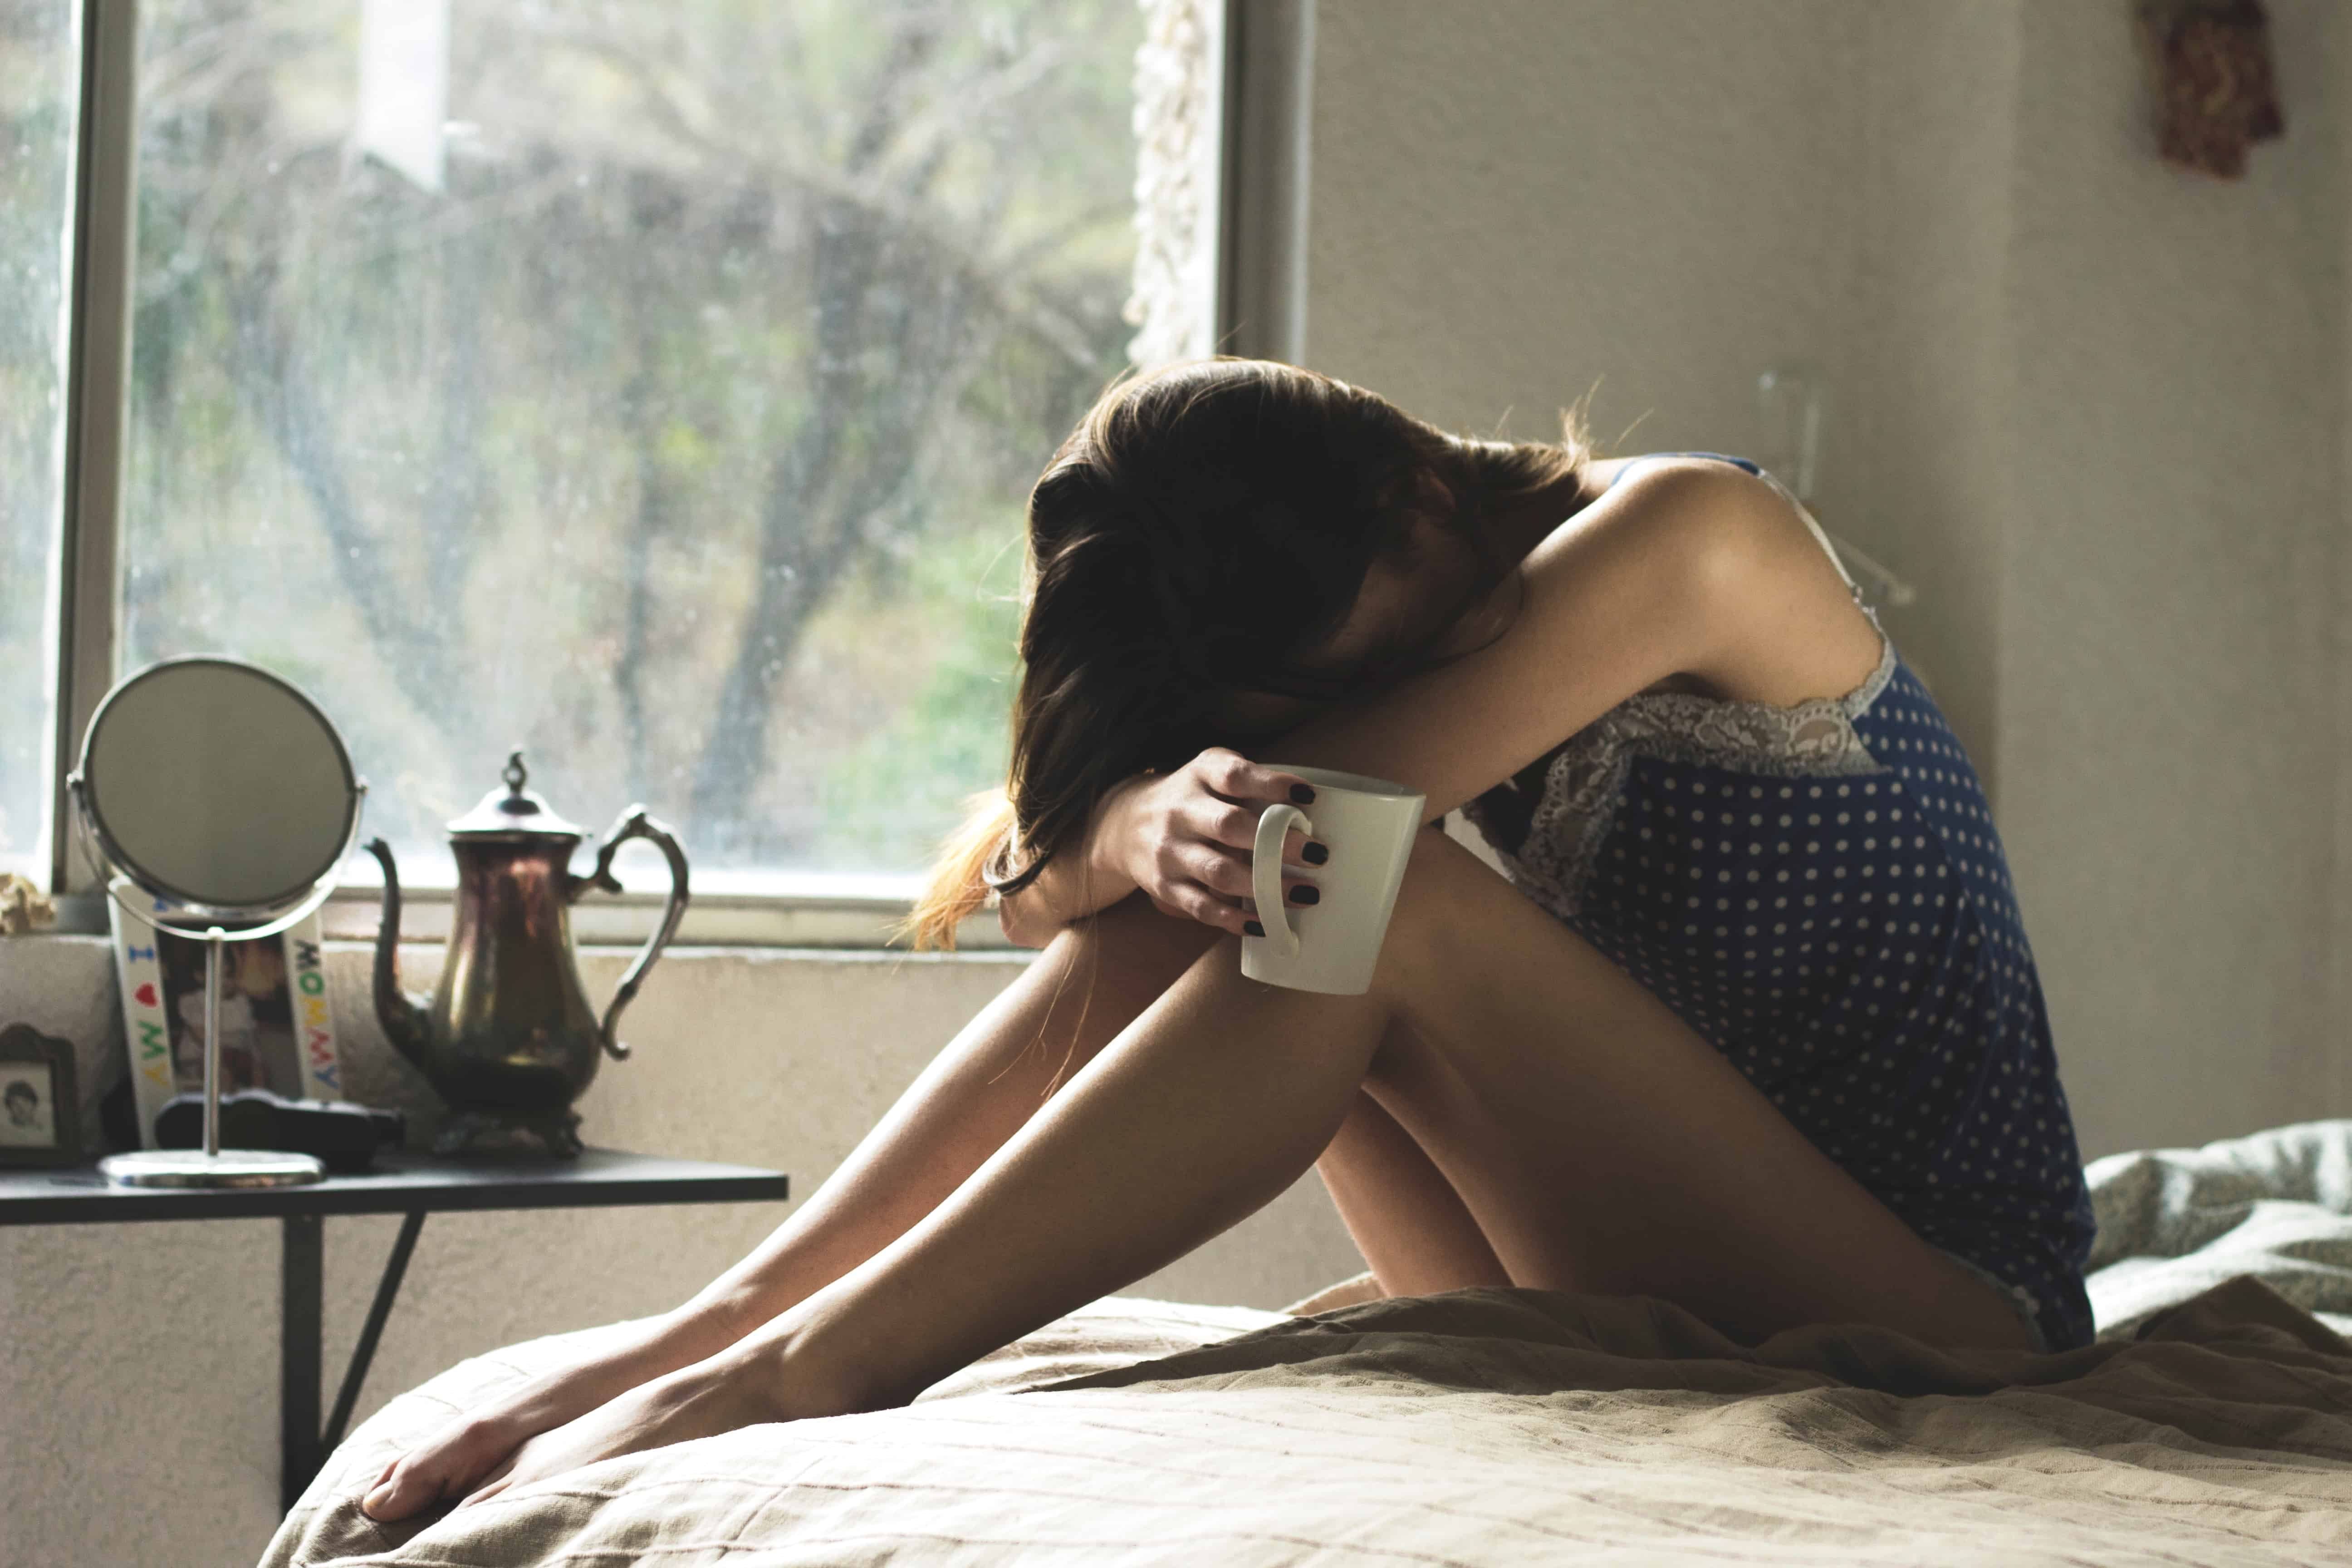 I Struggle With Depression. 10 Things I Wish People Knew About It